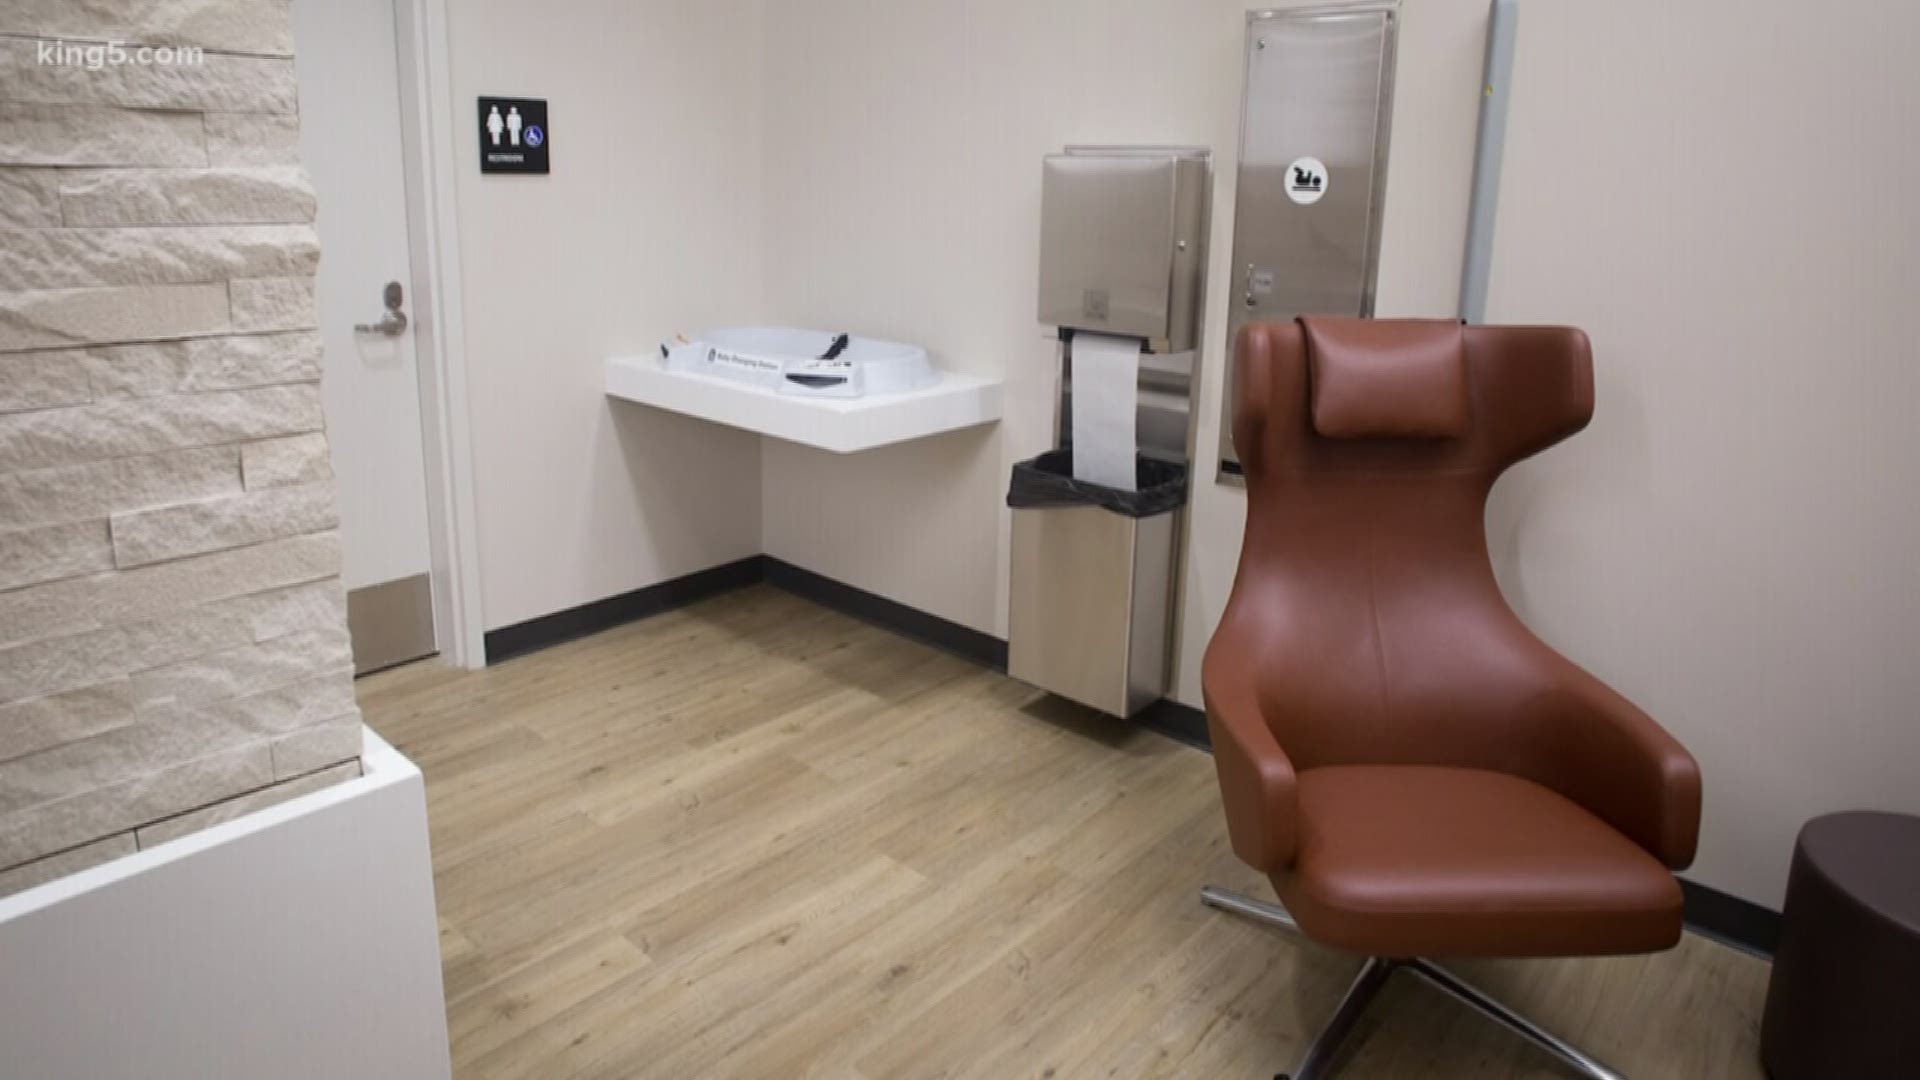 Sea-Tac Airport says it is one of the first airports in the country to offer a nursing suite that will knock your socks off.